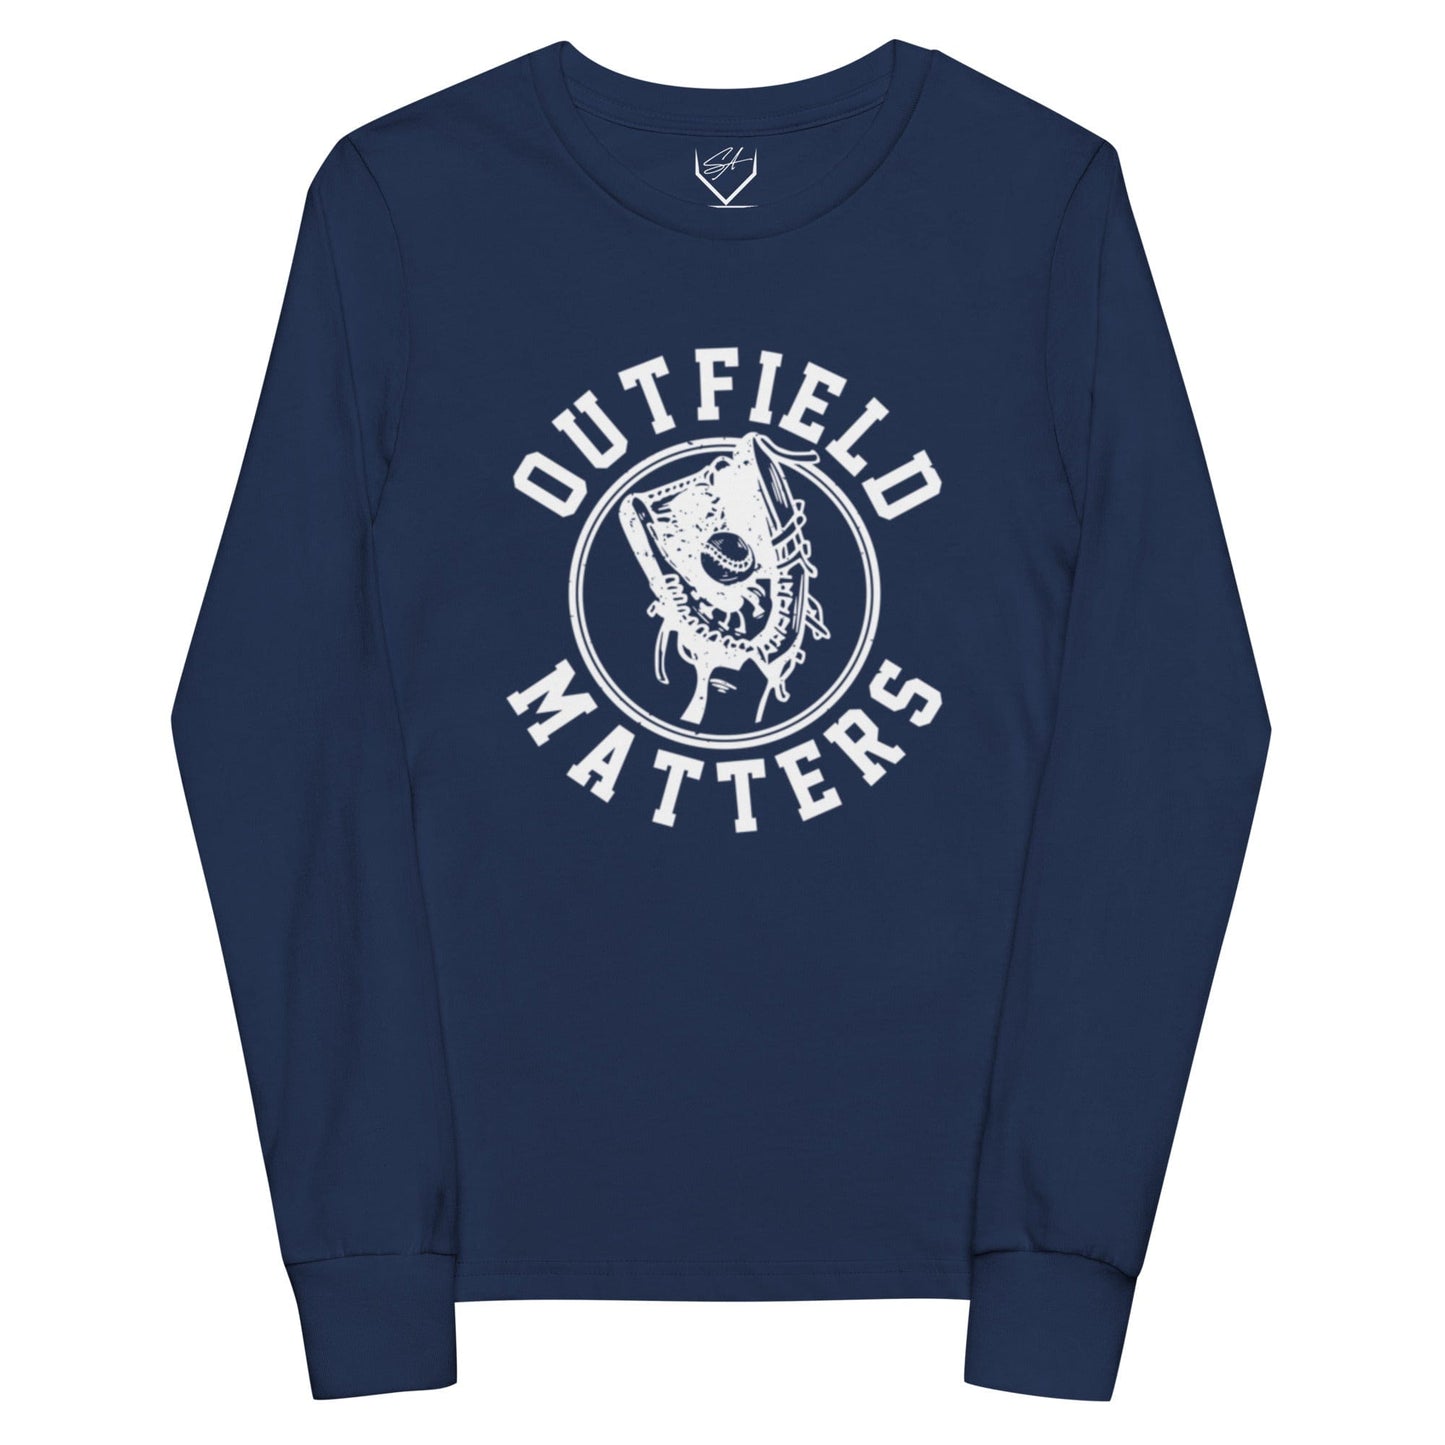 Outfield Matters - Youth Long Sleeve